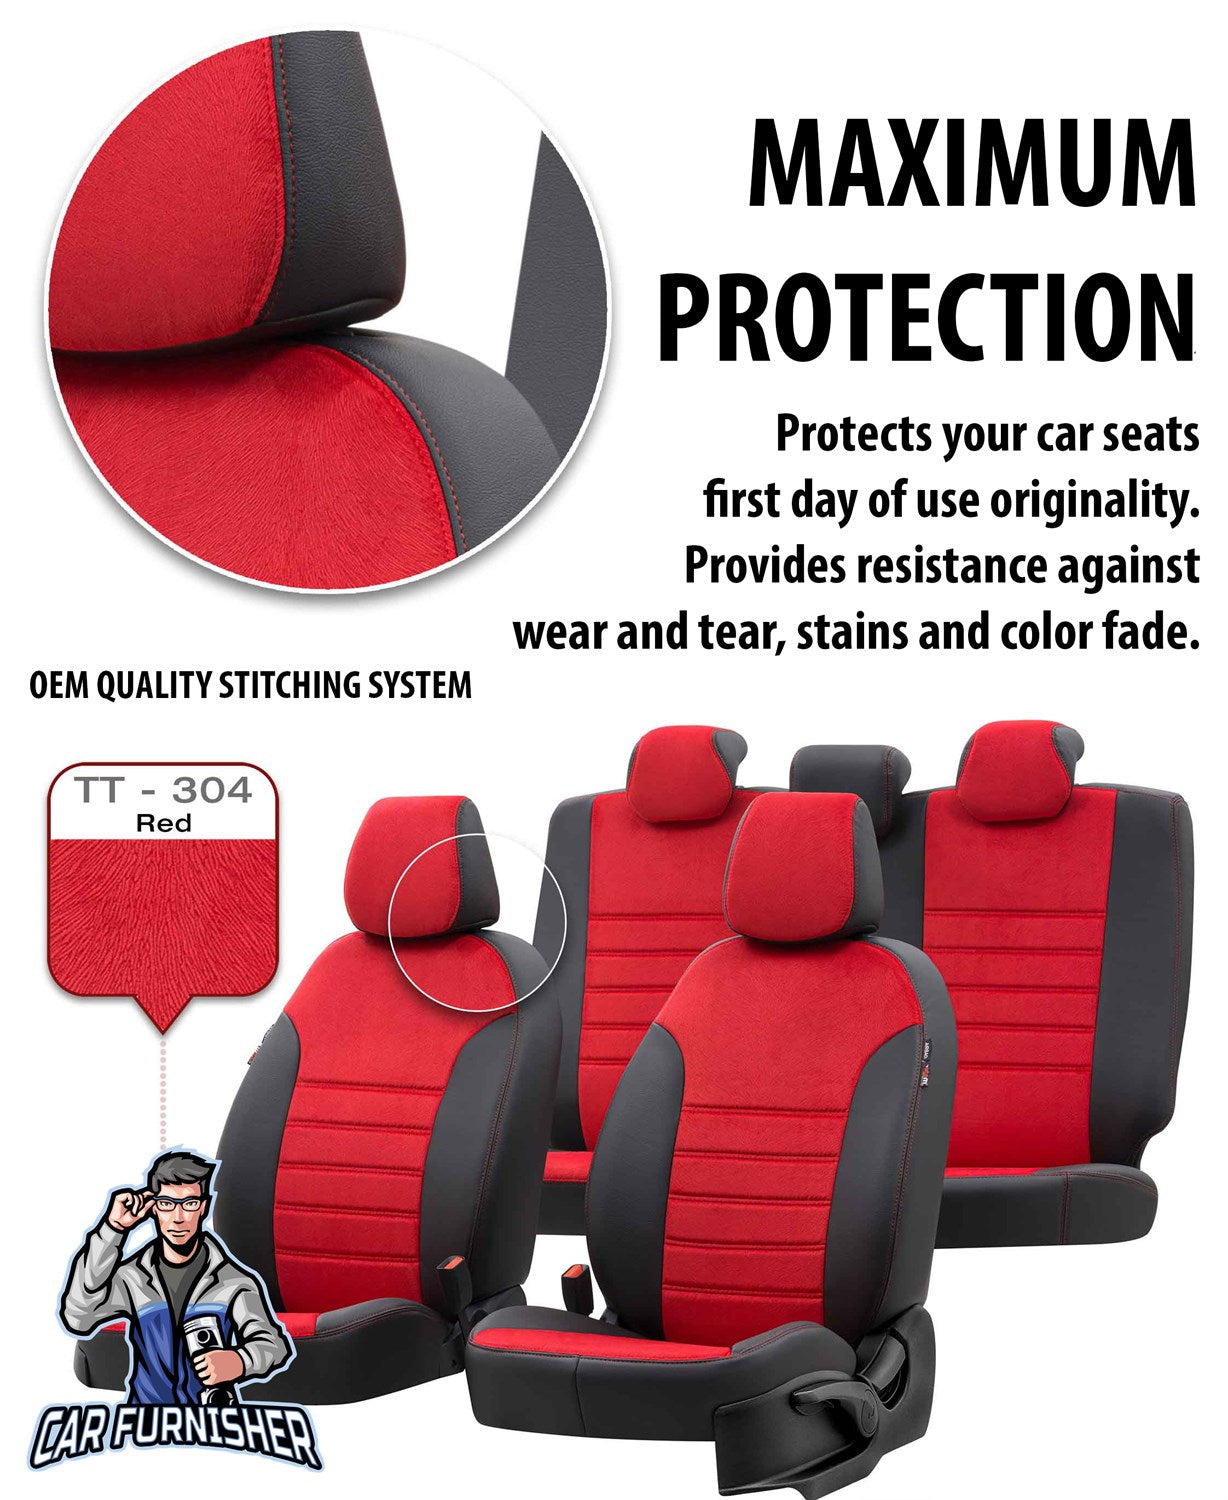 Renault Modus Car Seat Covers 2004-2008 London Design Smoked Full Set (5 Seats + Handrest) Leather & Fabric